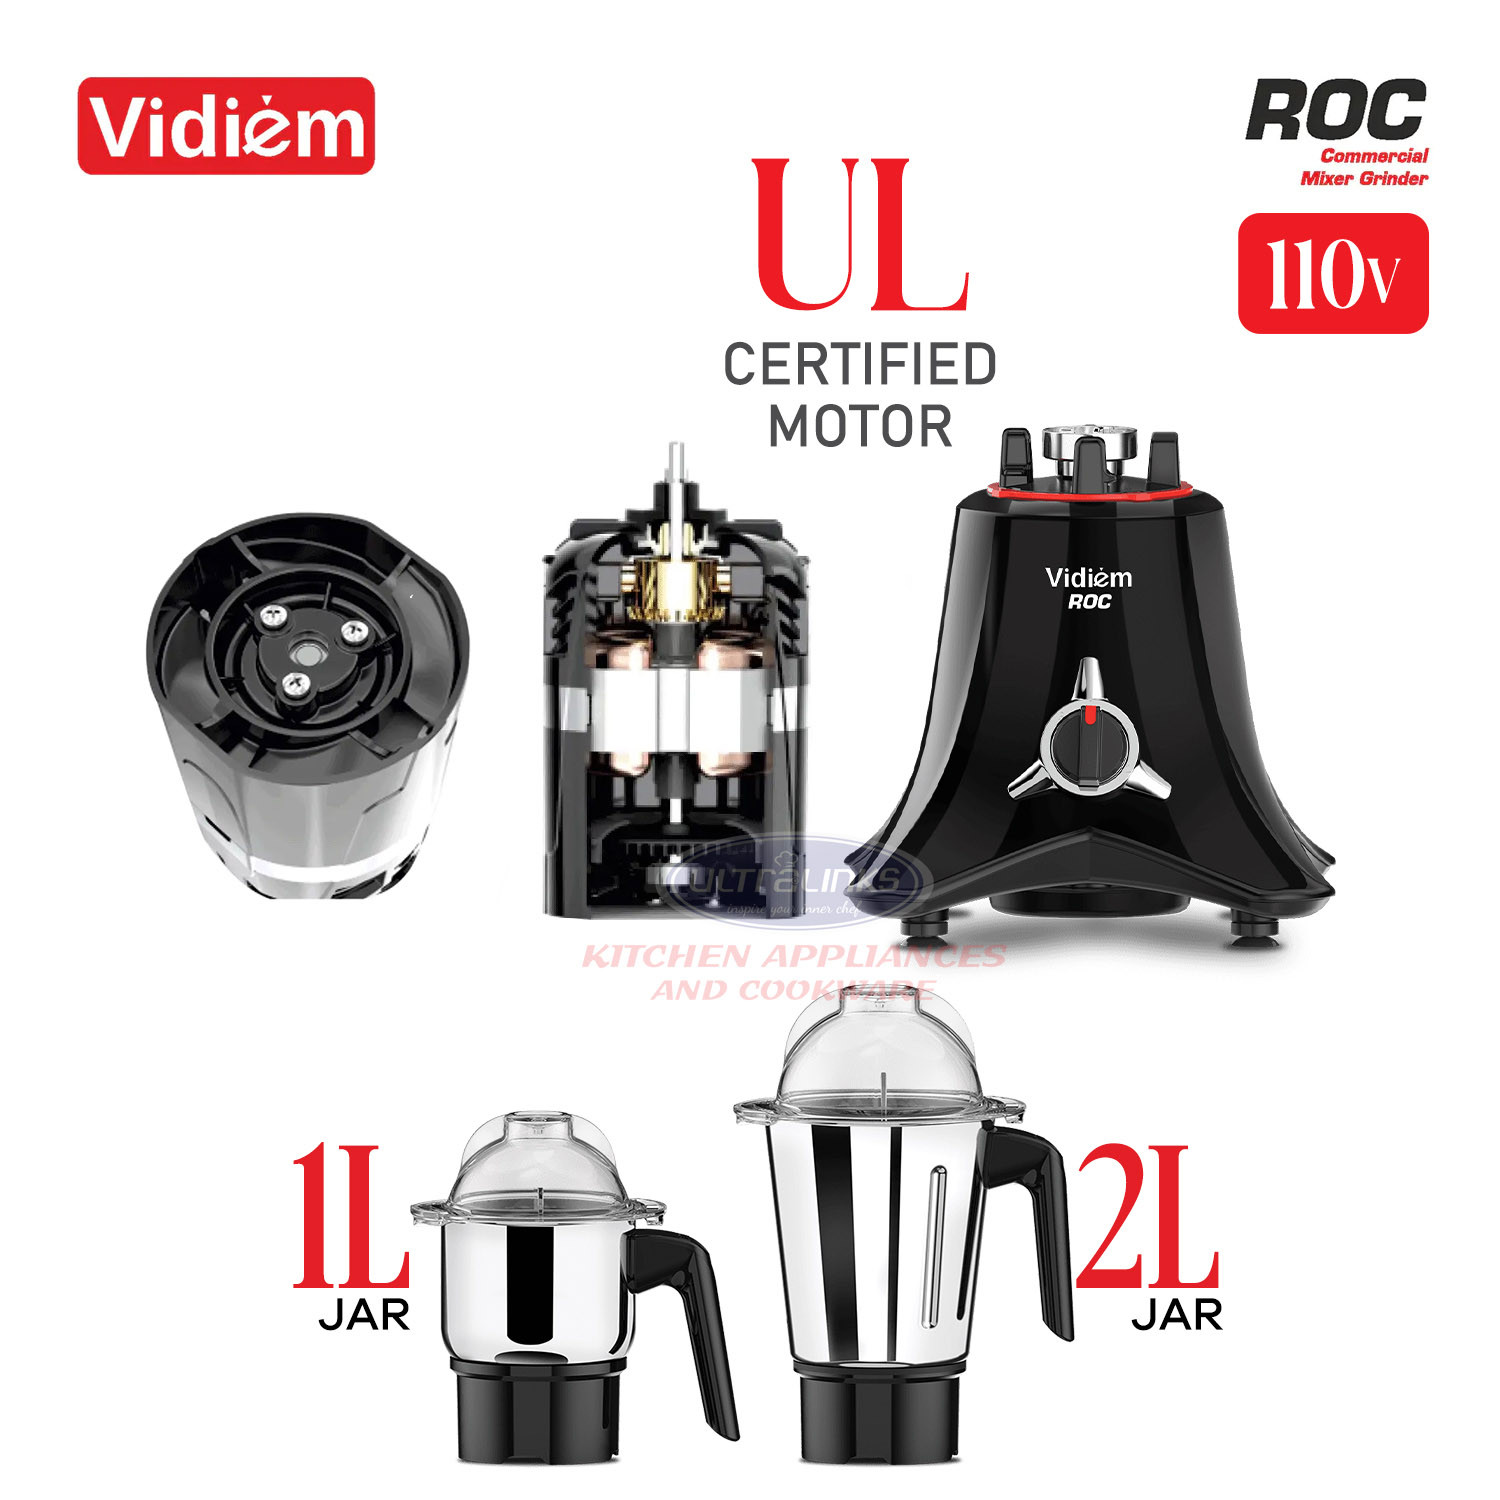 vidiem-roc-1200w-110v-commercial-residential-mixer-grinder-stainless-steel-jars-indian-mixer-grinder-spice-coffee-grinder-jar-for-use-in-canada-usa7